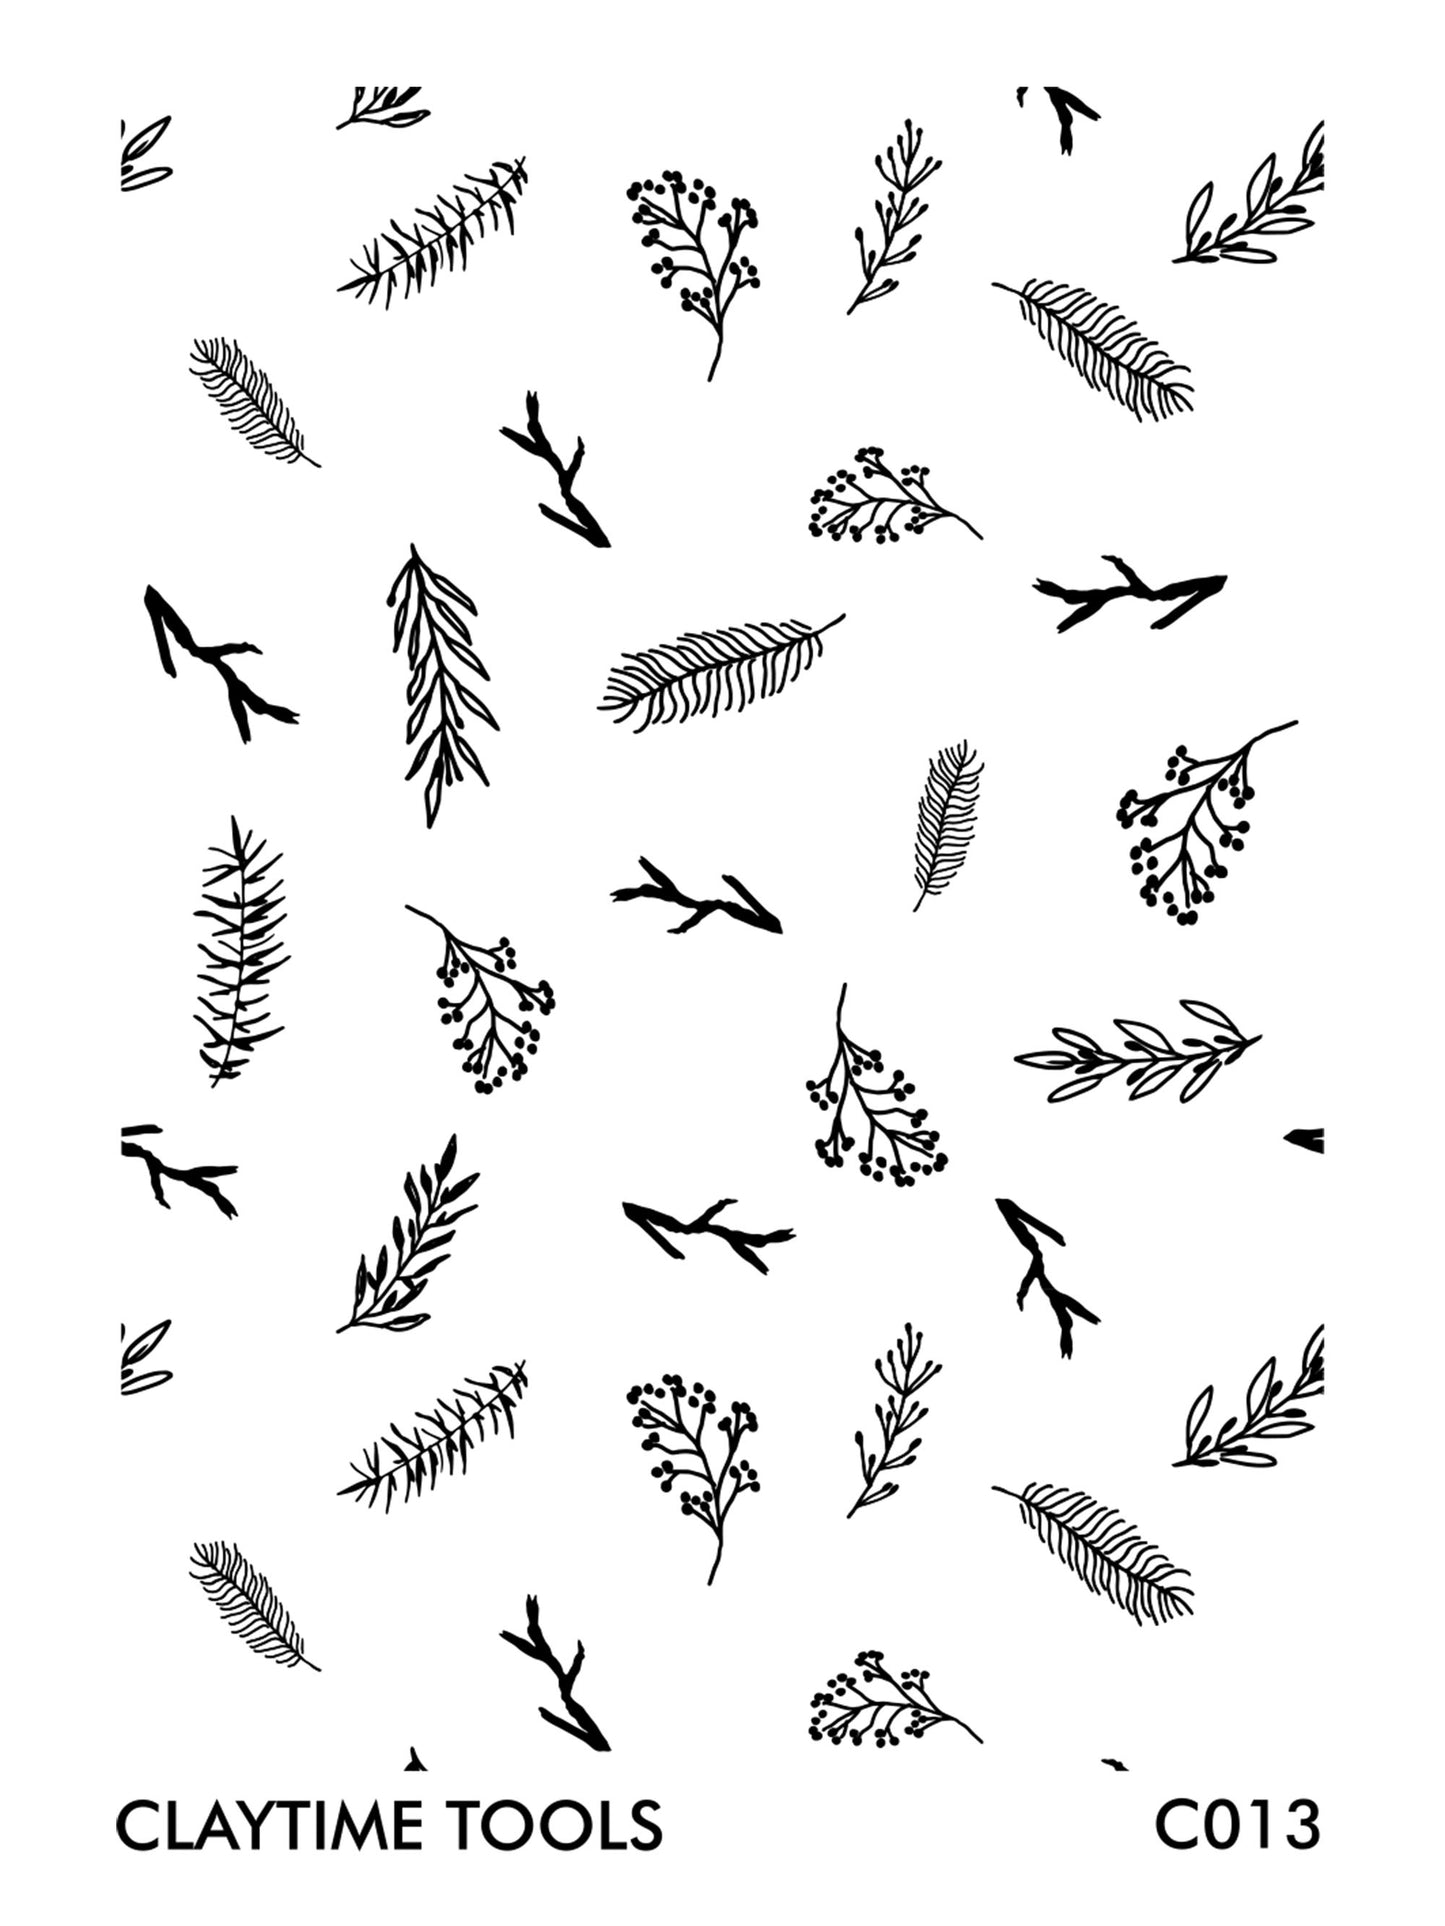 Image of a silkscreen print featuring illustrated branches from winter trees.